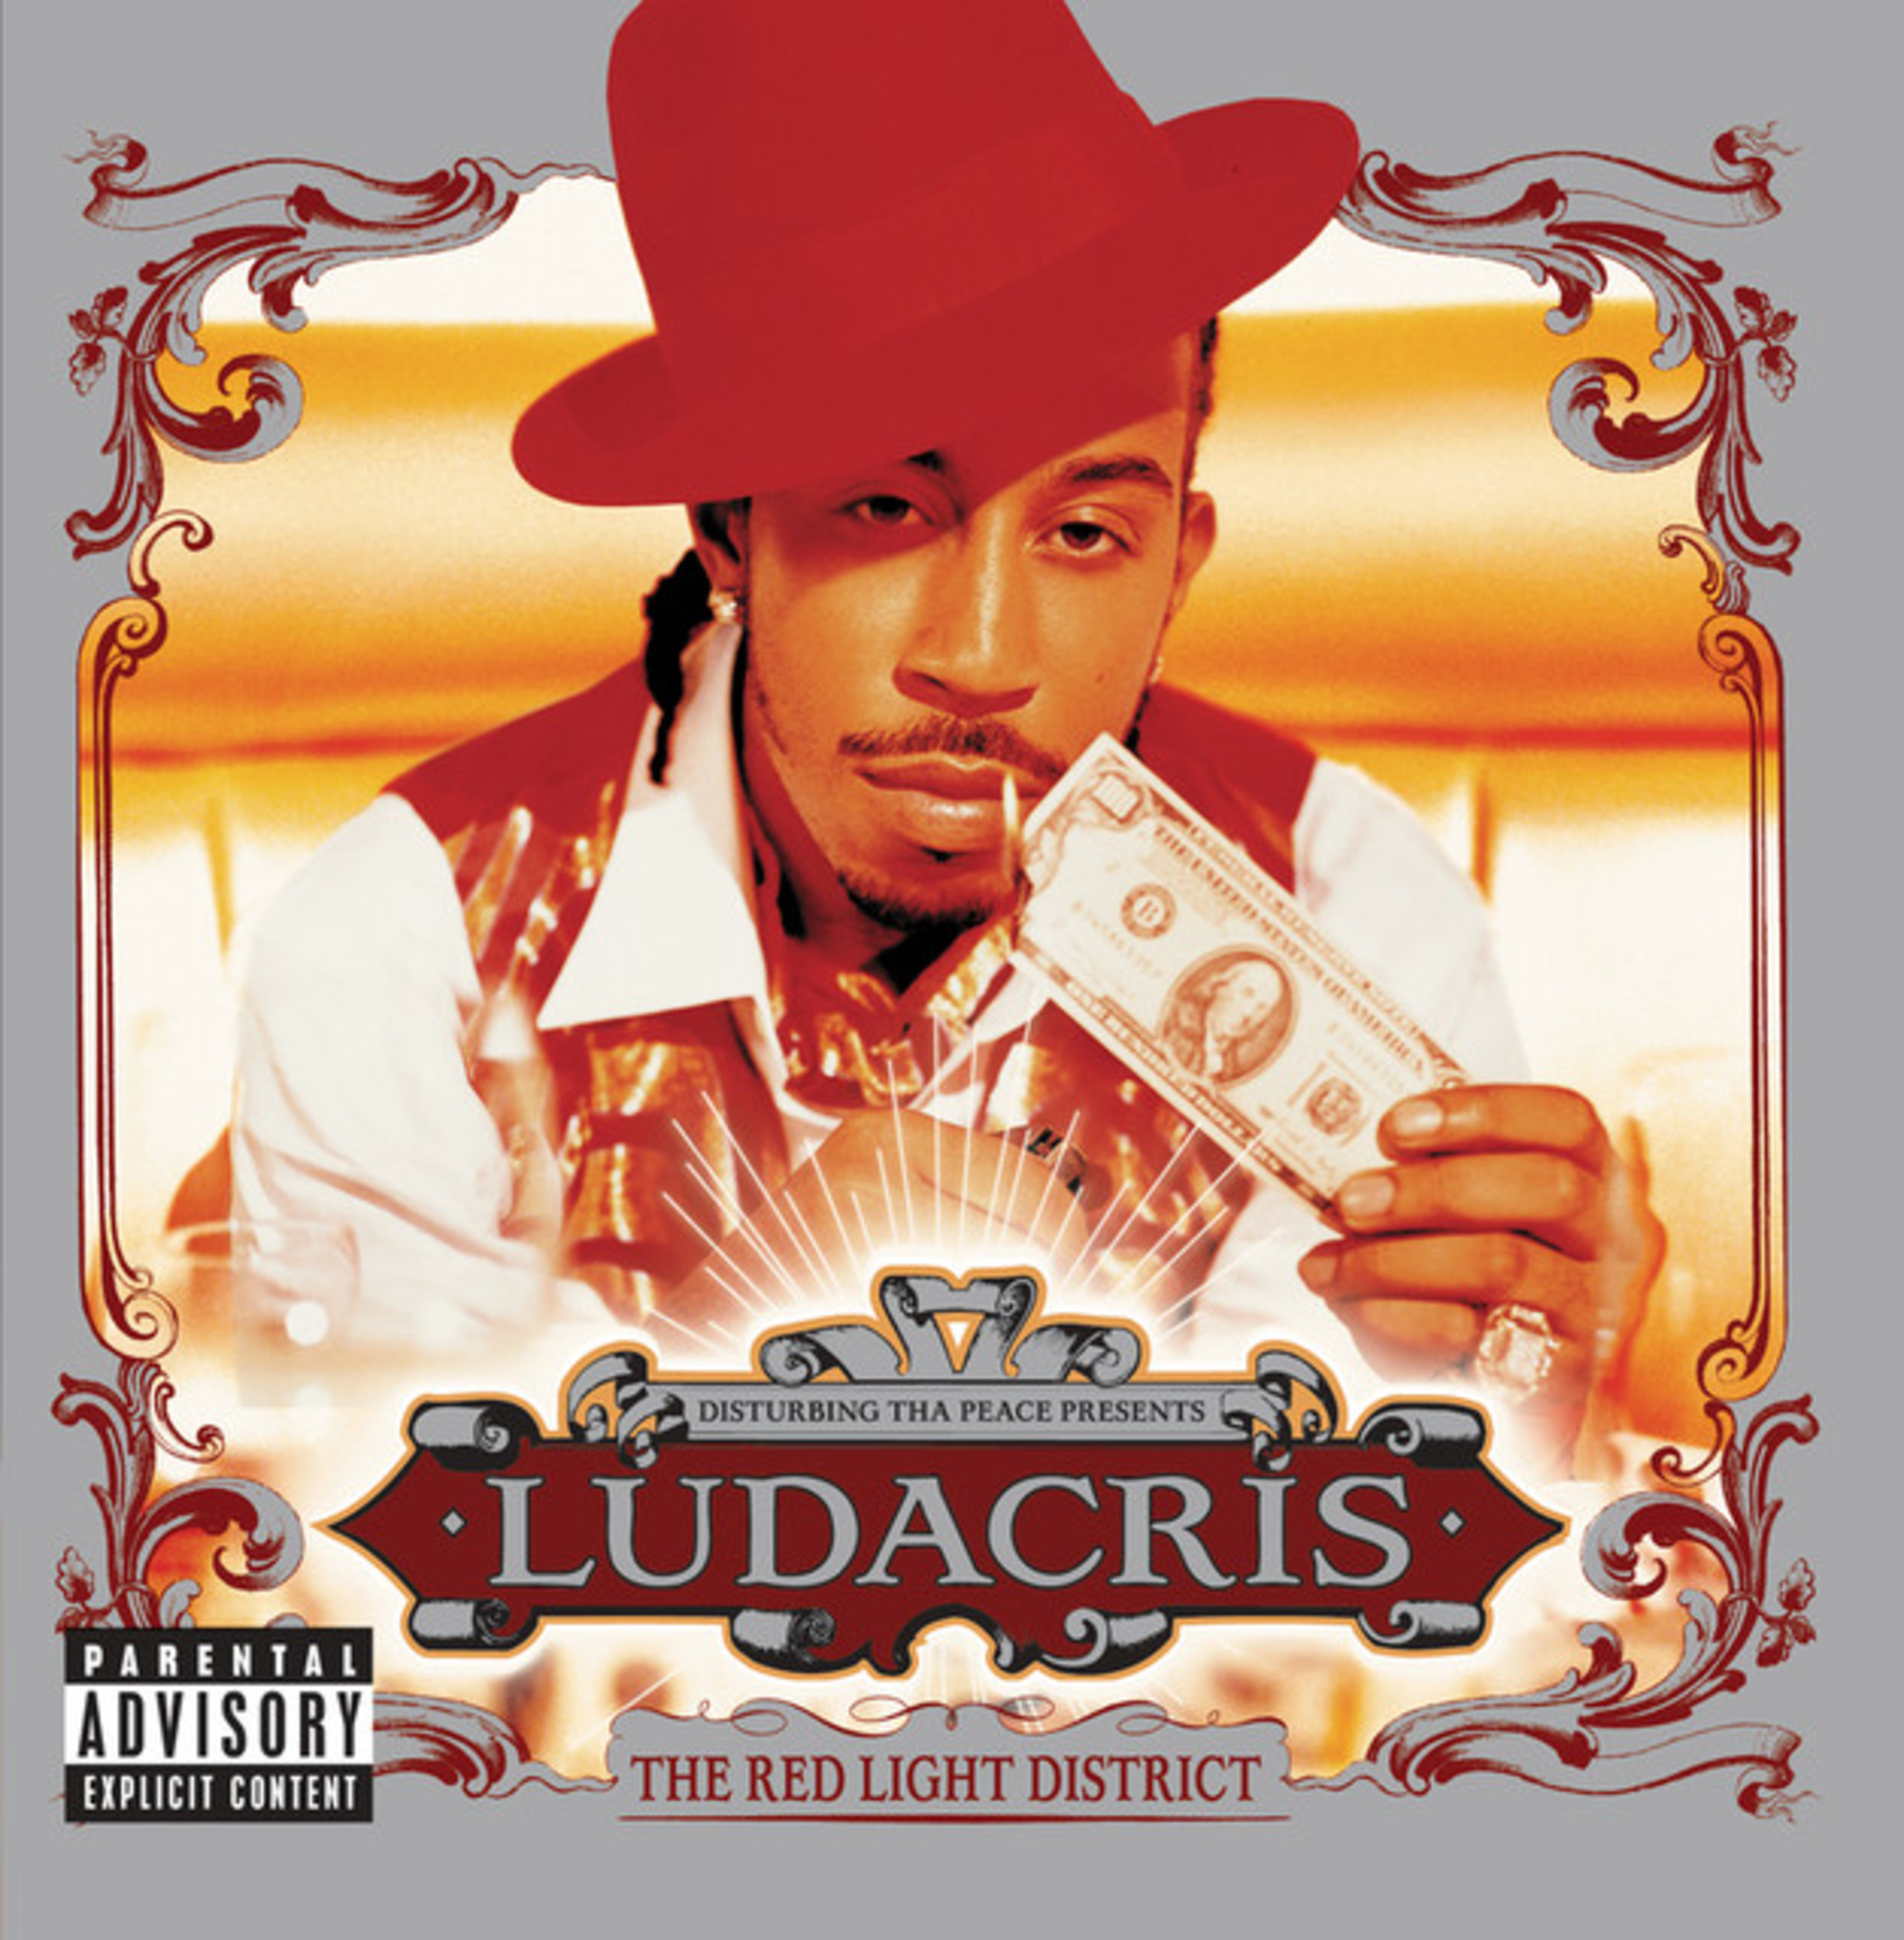 <p>In 2004, rapper Ludacris released his fifth studio album, <em>The Red Light District.</em> He teamed up with several producers, including Polow Da Don, Salaam Remi, Organized Noize, and Timbaland, as well as a number of featured artists like DMX, Nate Dogg, Sleepy Brown, and Bobby V. Ludacris is a master at making songs deemed to his haters like on "Get Back" but he also knows how to make smooth rap love songs like <a href="https://www.youtube.com/watch?v=HXLCOIcb41Y">"Pimpin' All Over The World." </a></p><p>You may also like: <a href='https://www.yardbarker.com/entertainment/articles/the_15_worst_mario_video_games_031824/s1__38716528'>The 15 worst 'Mario' video games</a></p>